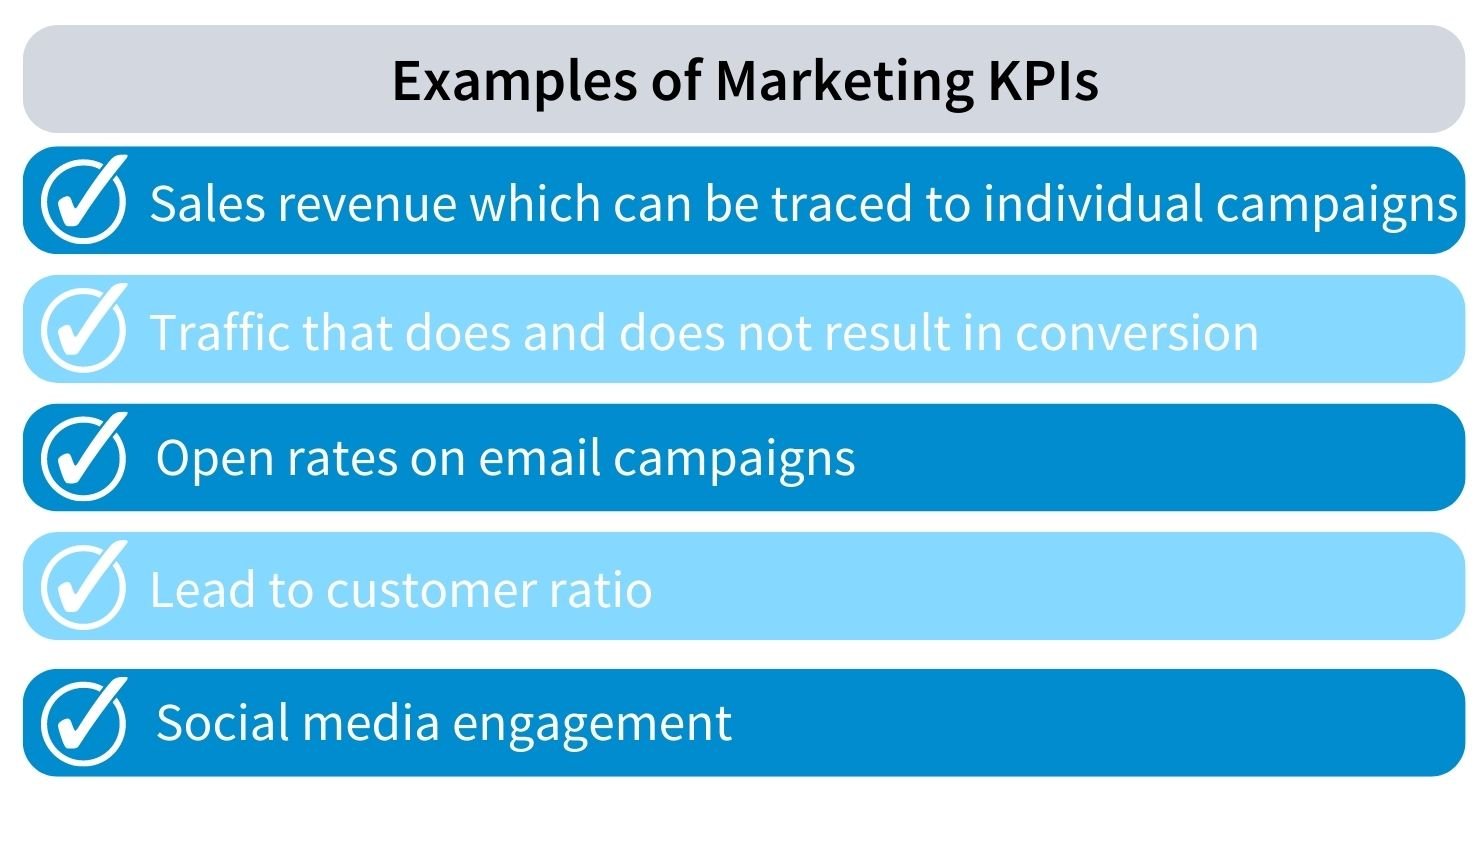 Examples of Marketing KPIs